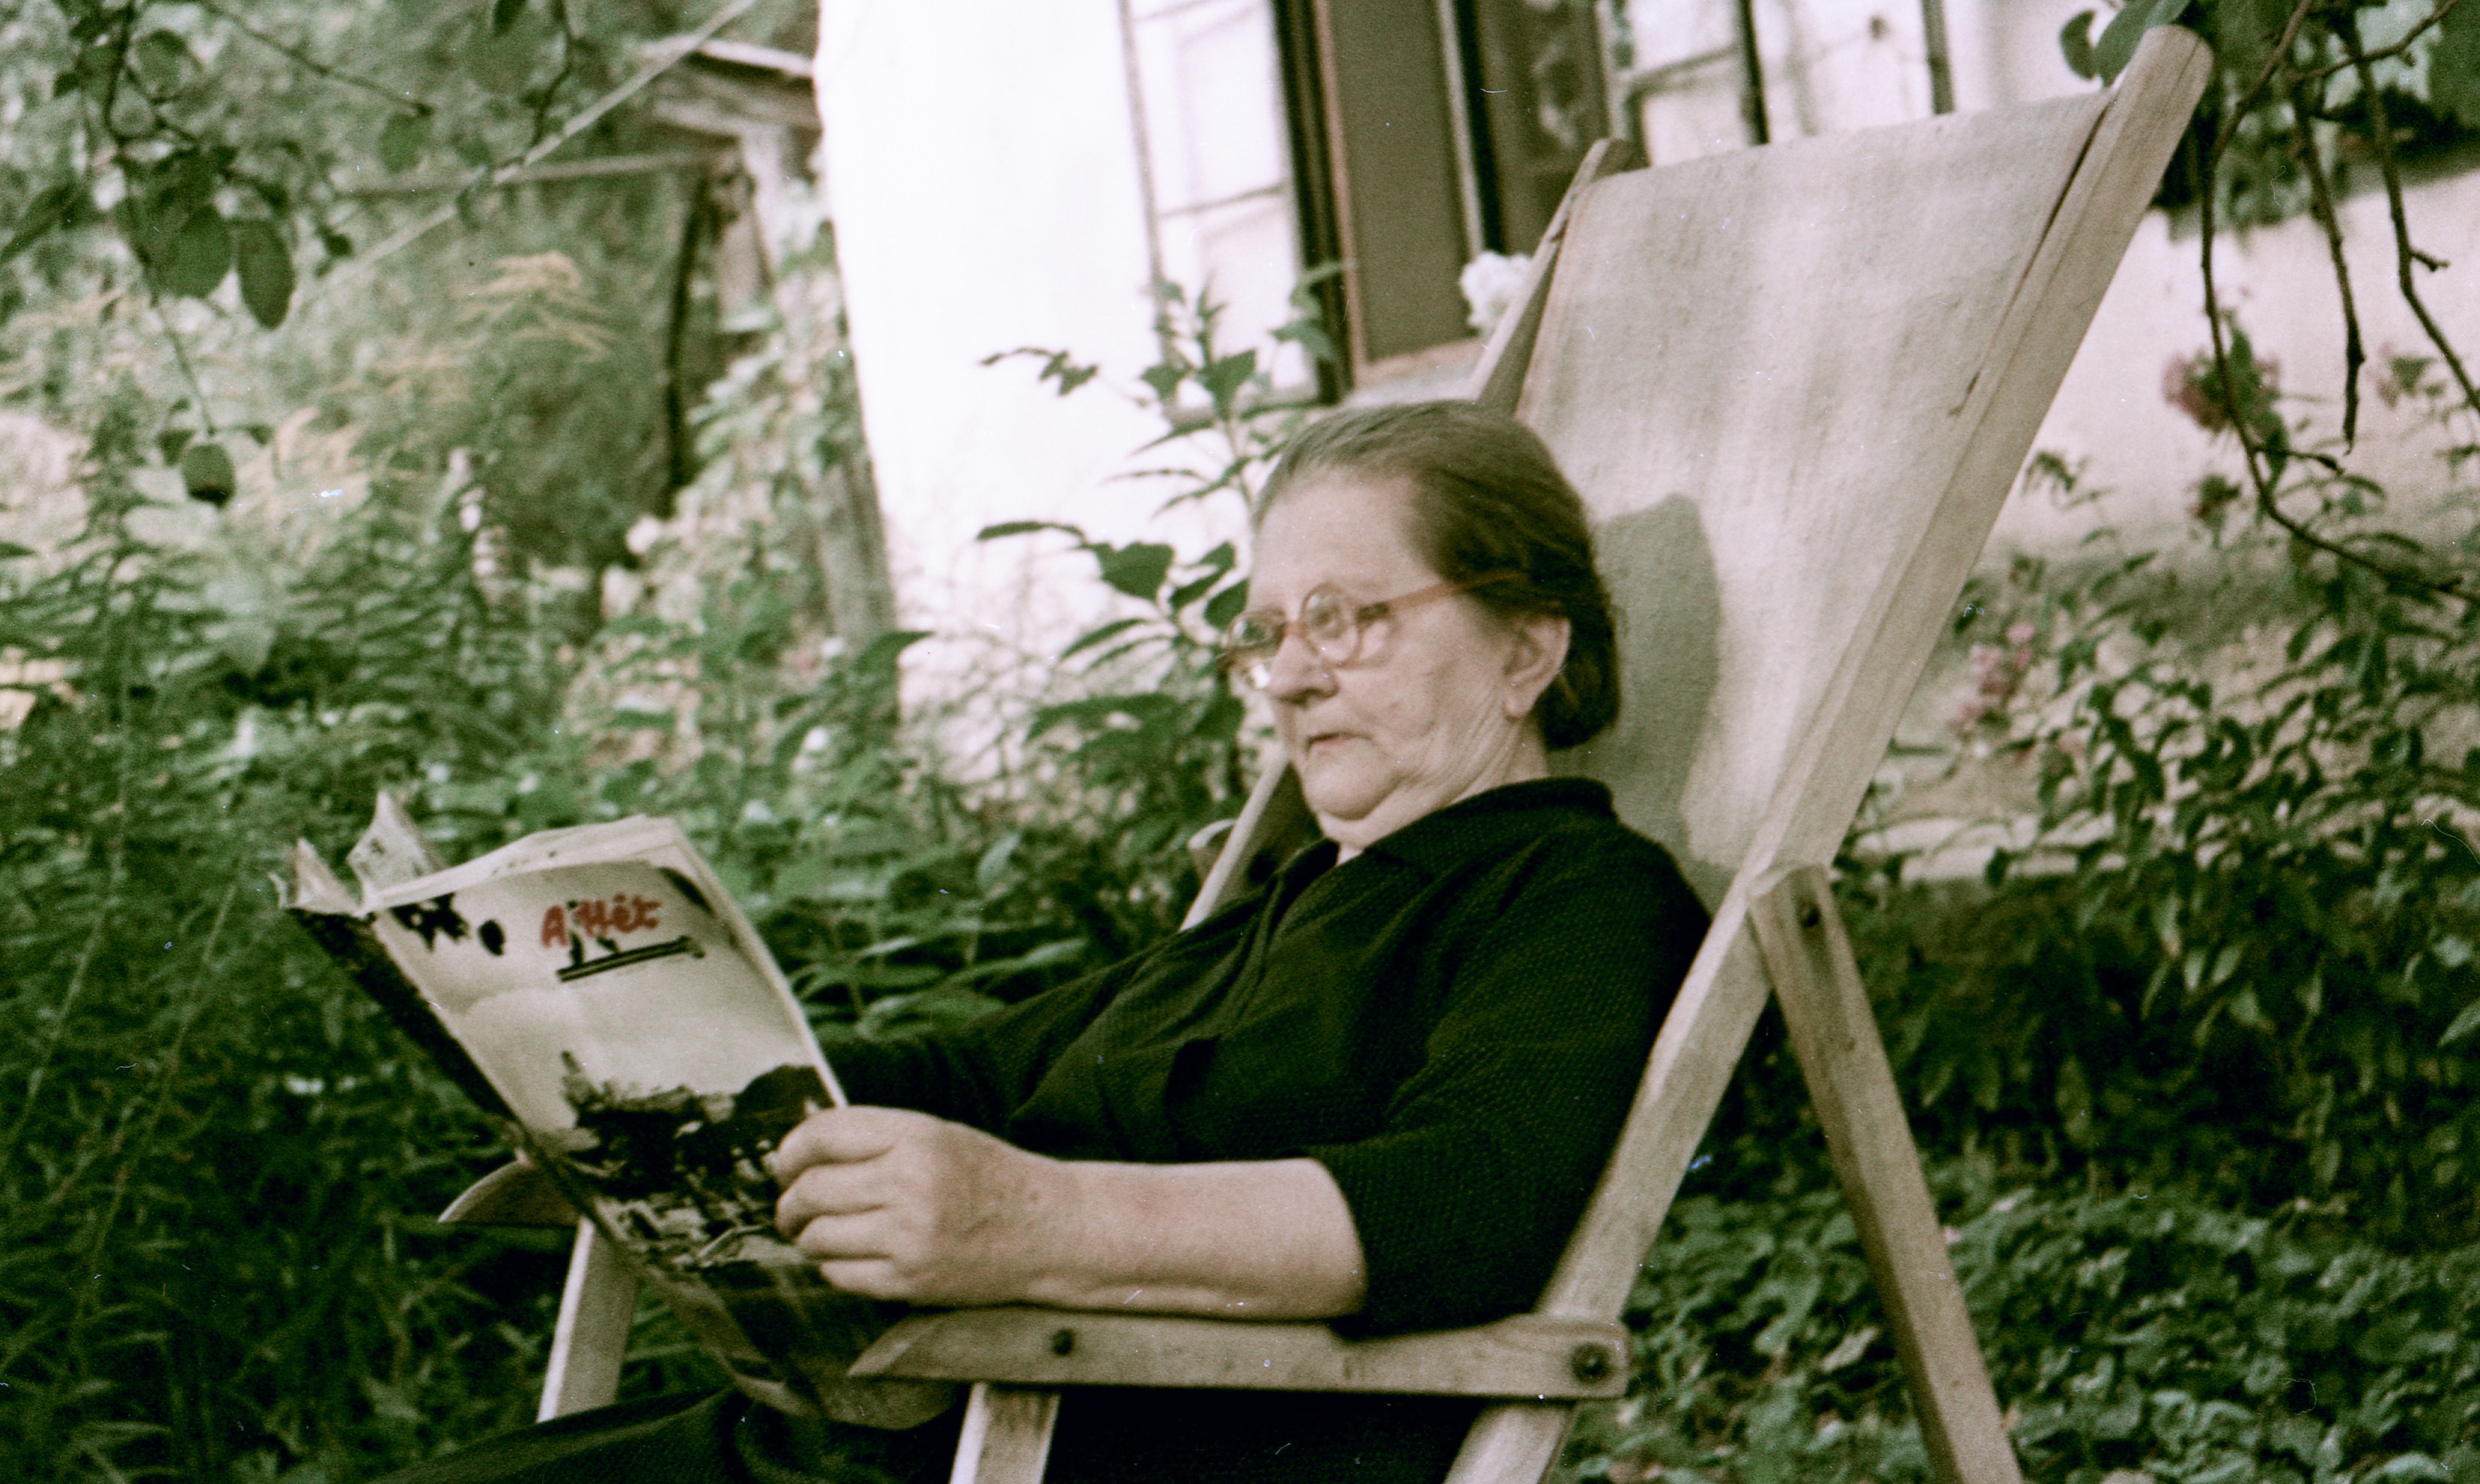 In a garden, an elderly woman sits in a canvas chair reading a magazine.